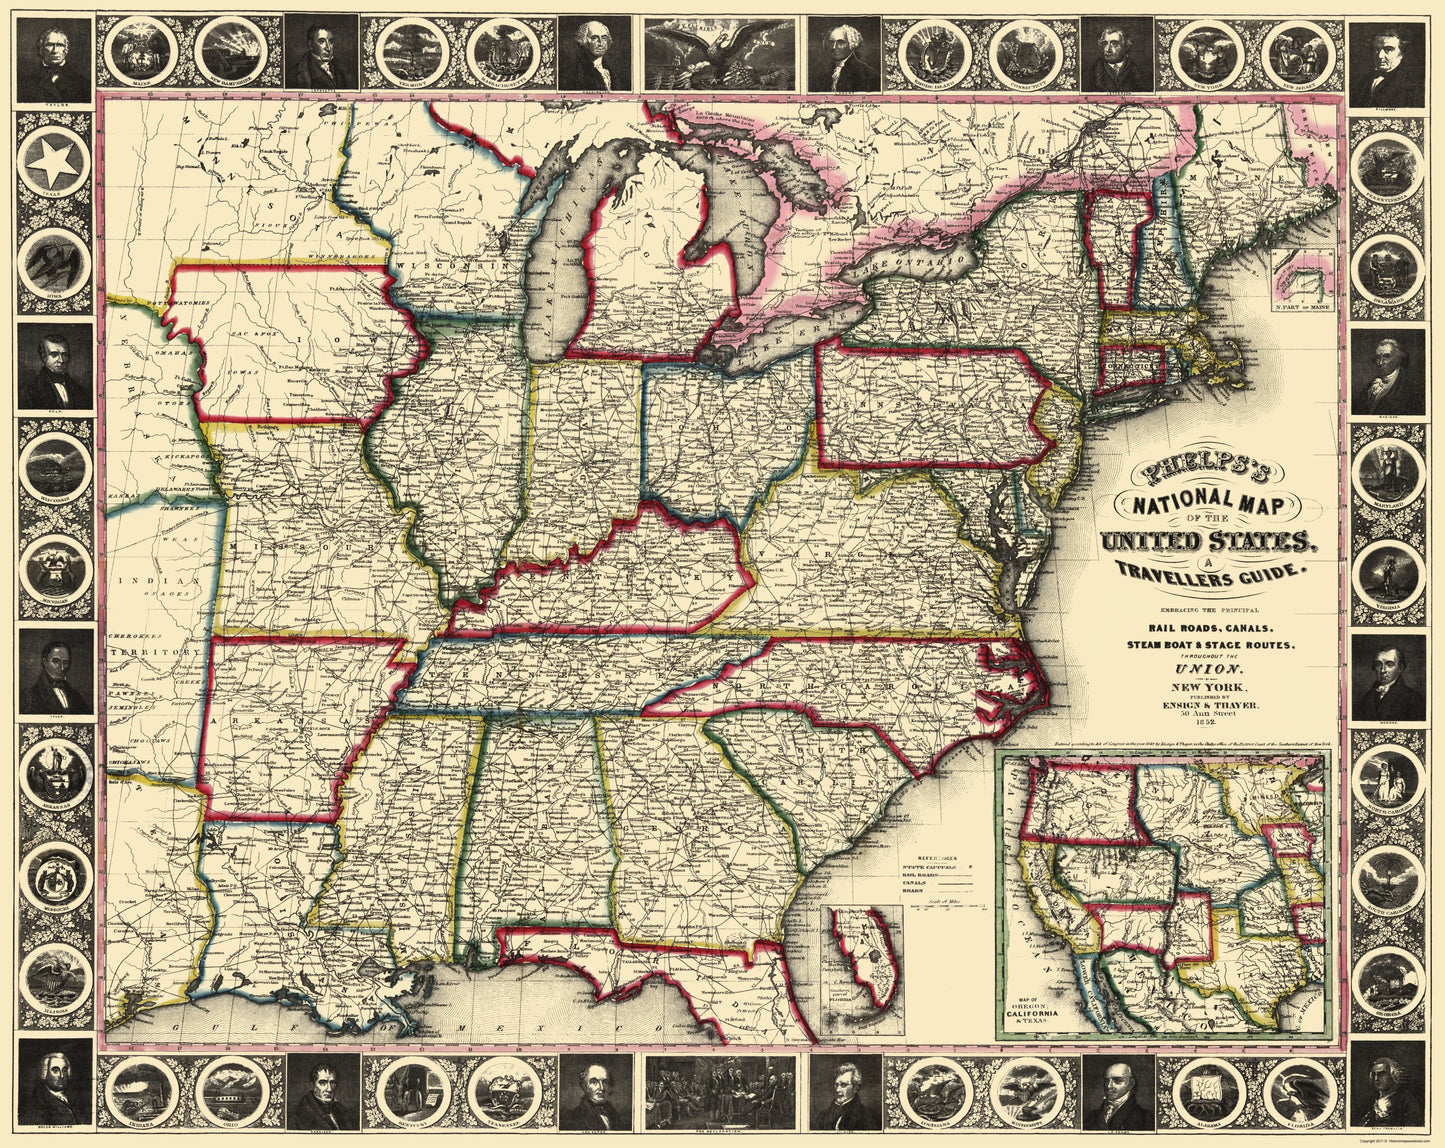 Historic State Map - United States Eastern Travellers Guide - Phelps 1852 - 23 x 28 - Vintage Wall Art